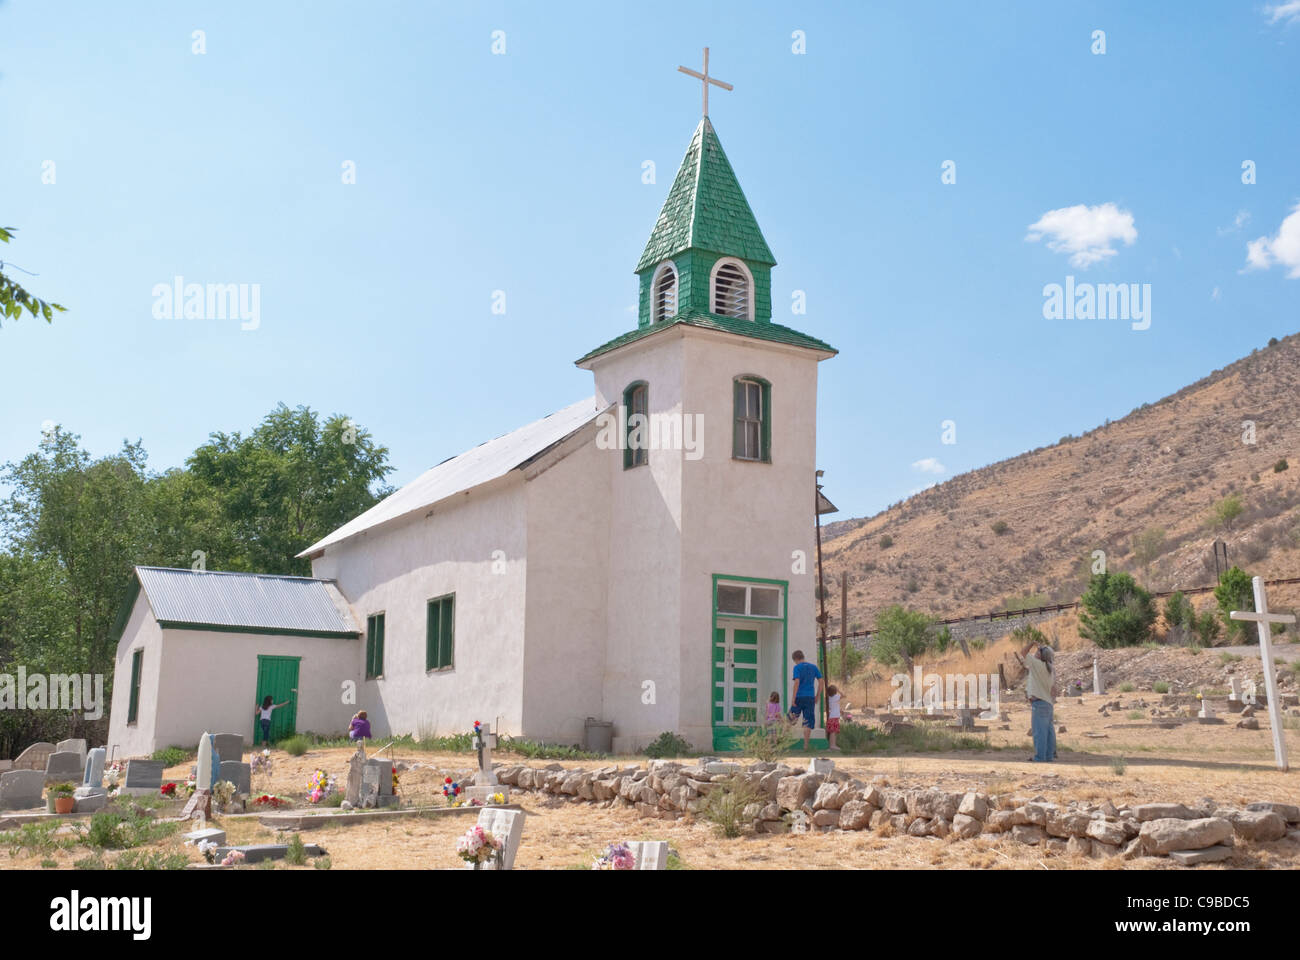 The church at San Patricio with it's green steeple sits in the beautiful Hondo Valley in southern New Mexico Stock Photo